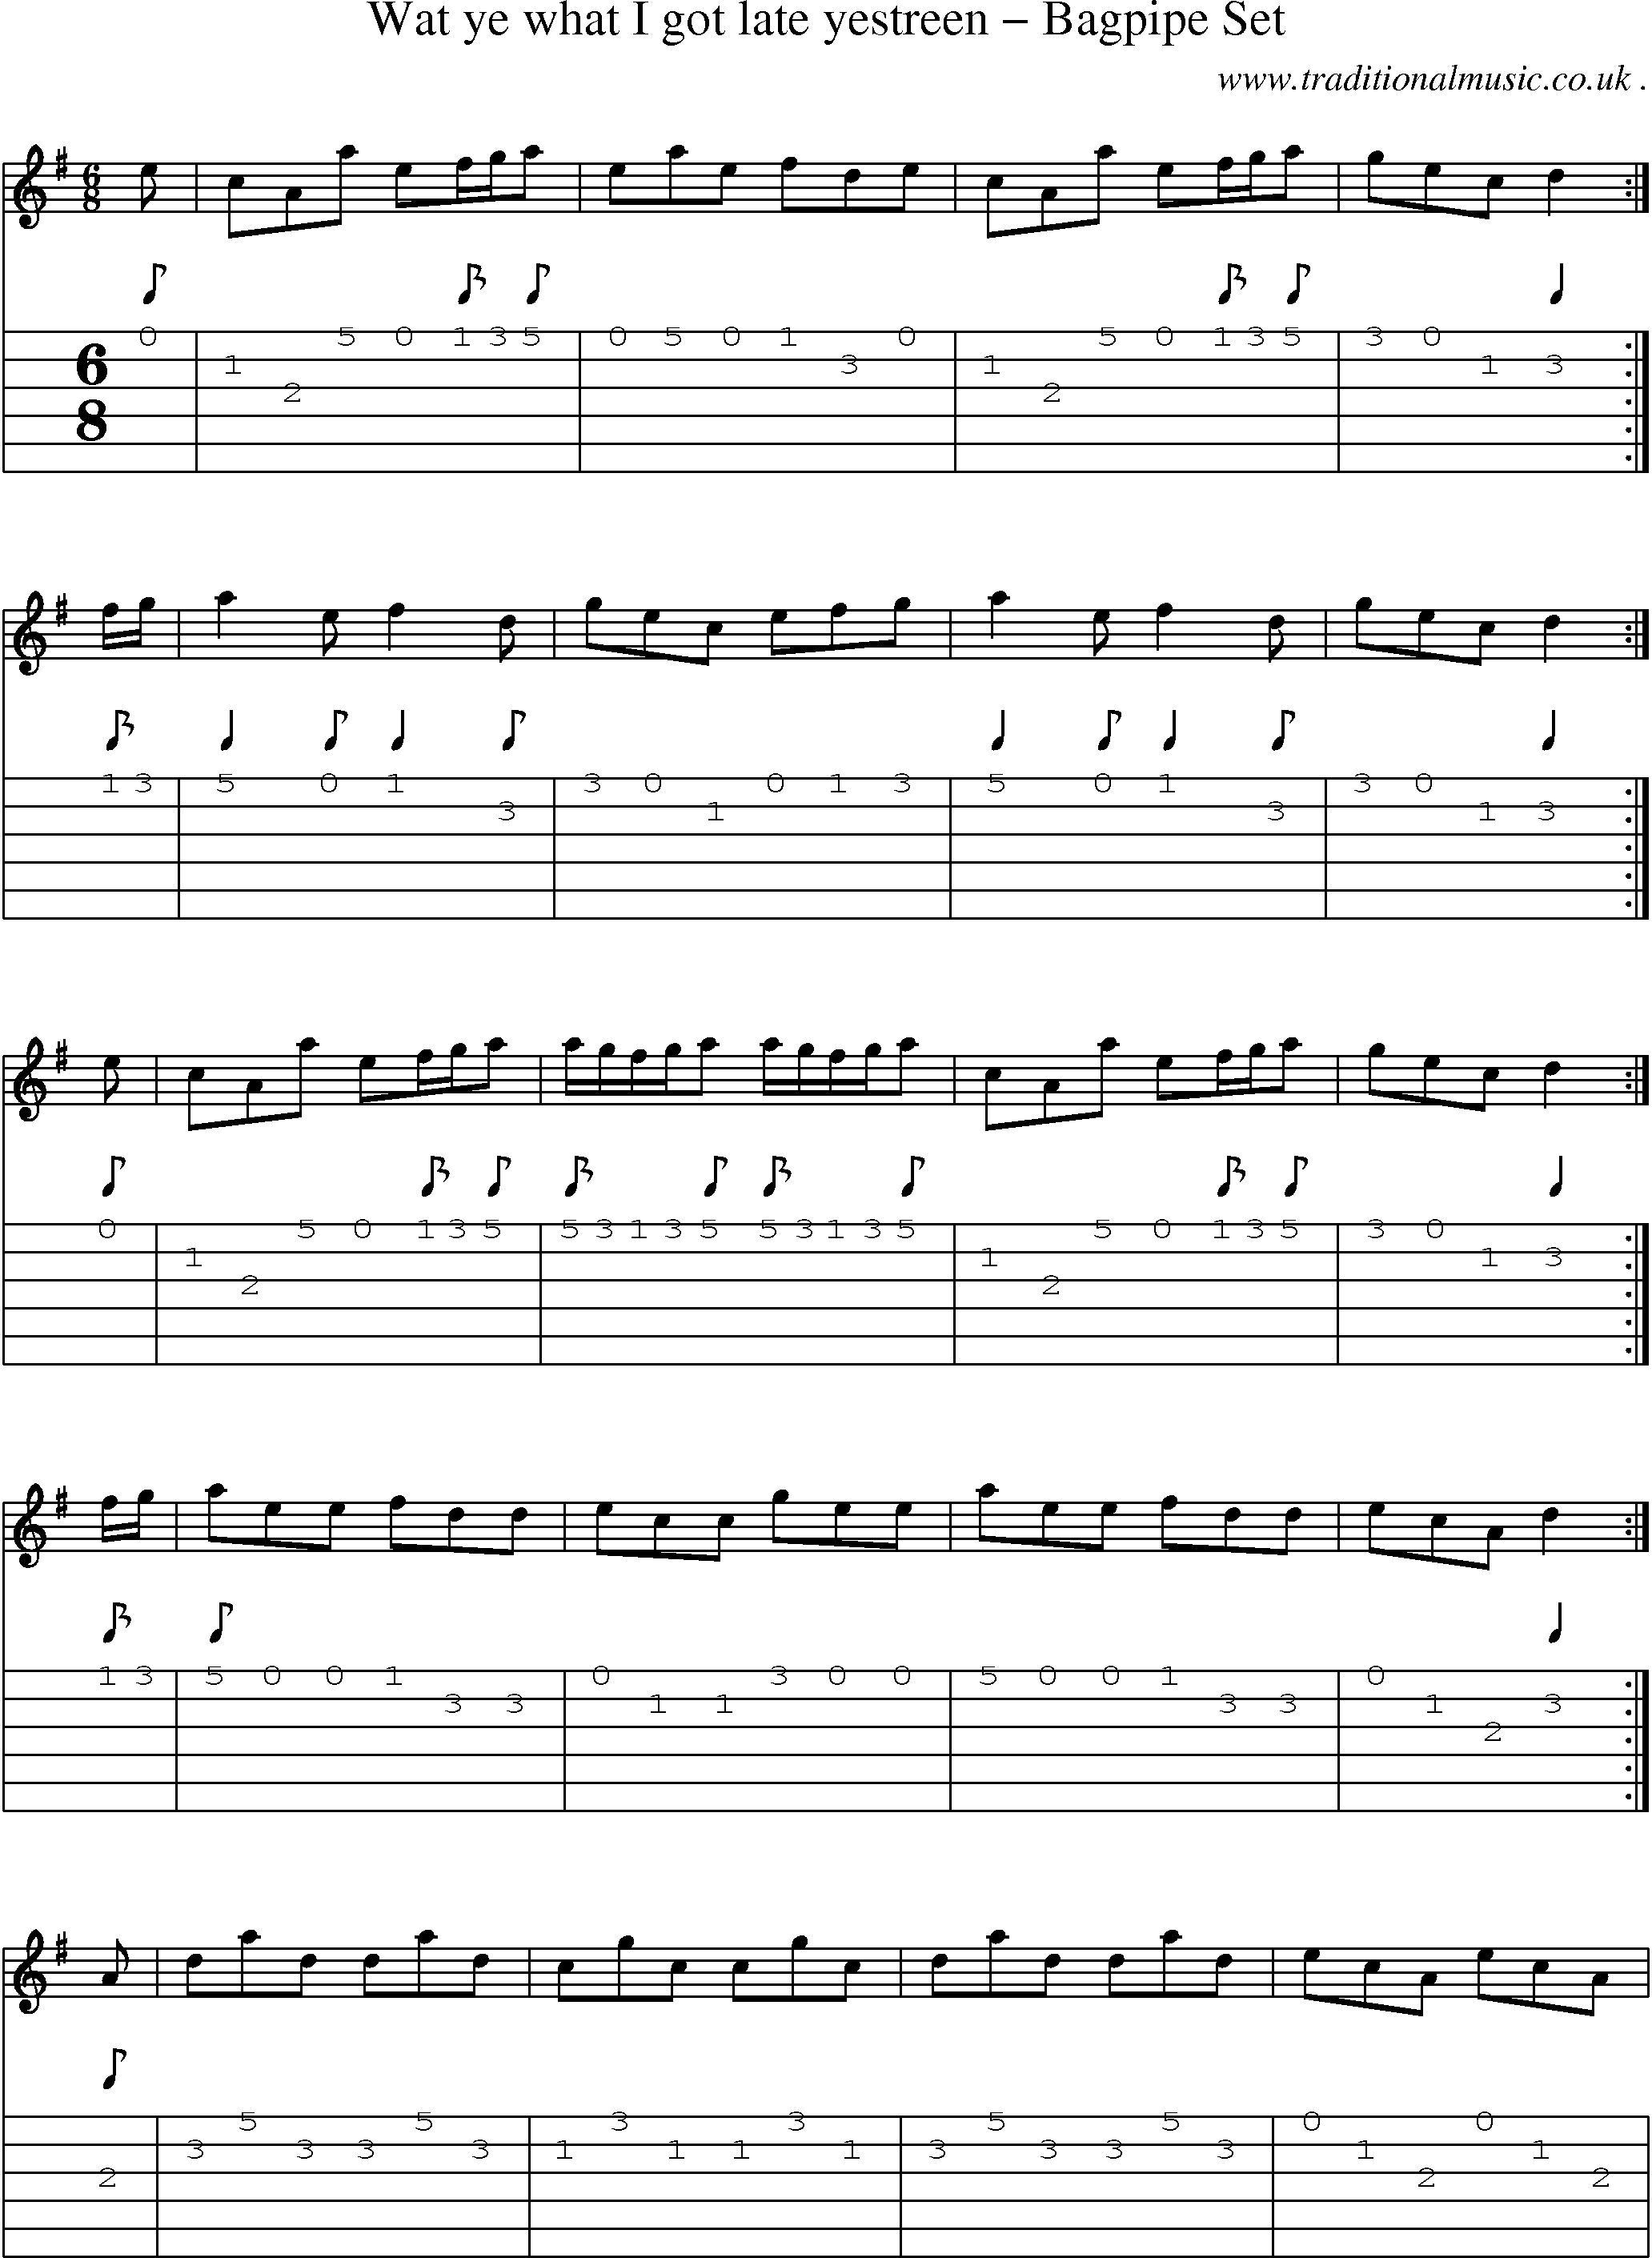 Sheet-Music and Guitar Tabs for Wat Ye What I Got Late Yestreen Bagpipe Set